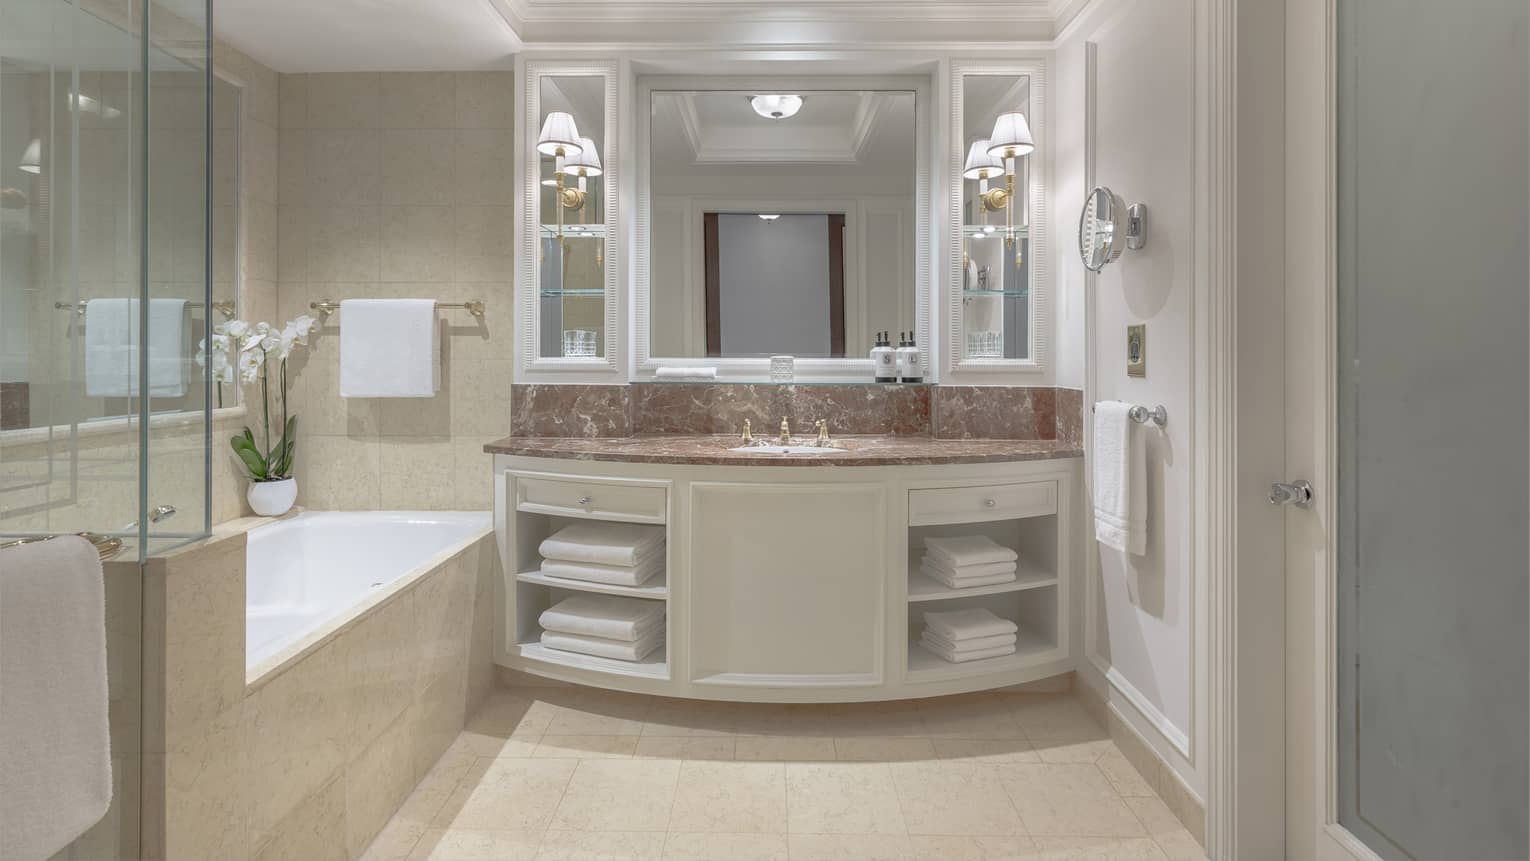 A bathroom with a counter with sink, shelves for towels, an enclosed shower and bathtub.